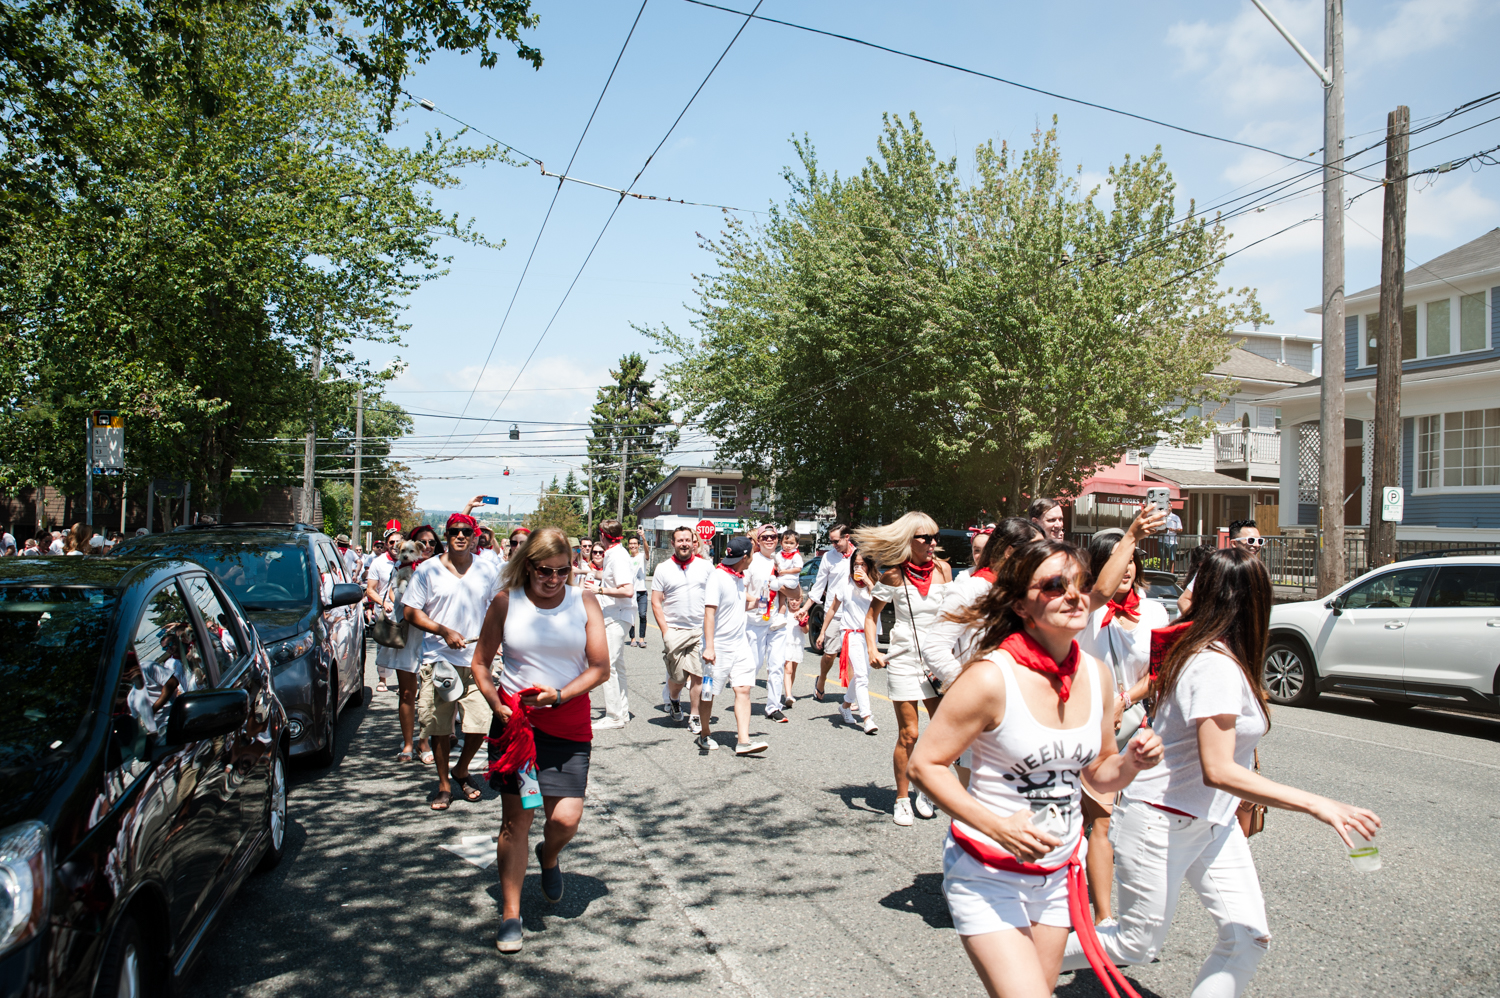 Photos The 10th Queen Anne Running of the Bulls was a sight to behold